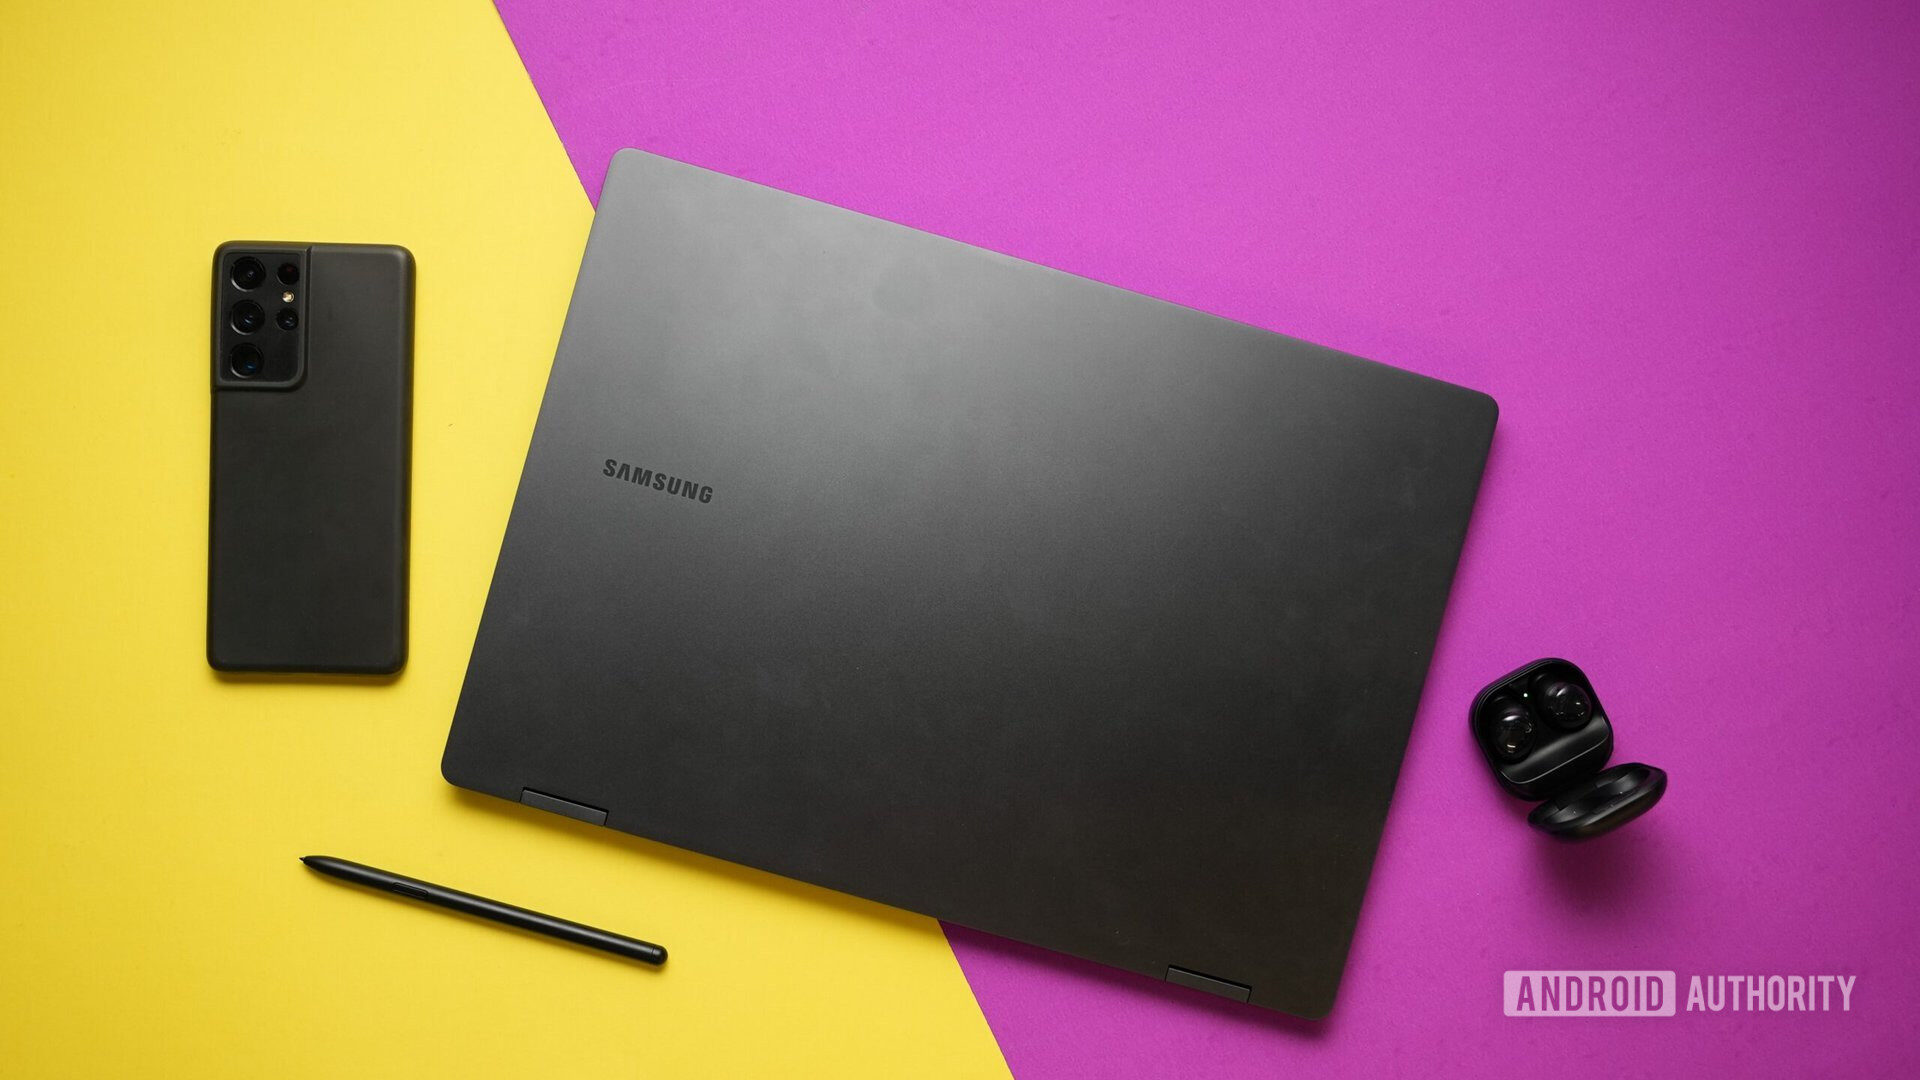 Samsung Galaxy Book 3 Pro 360 with Galaxy devices